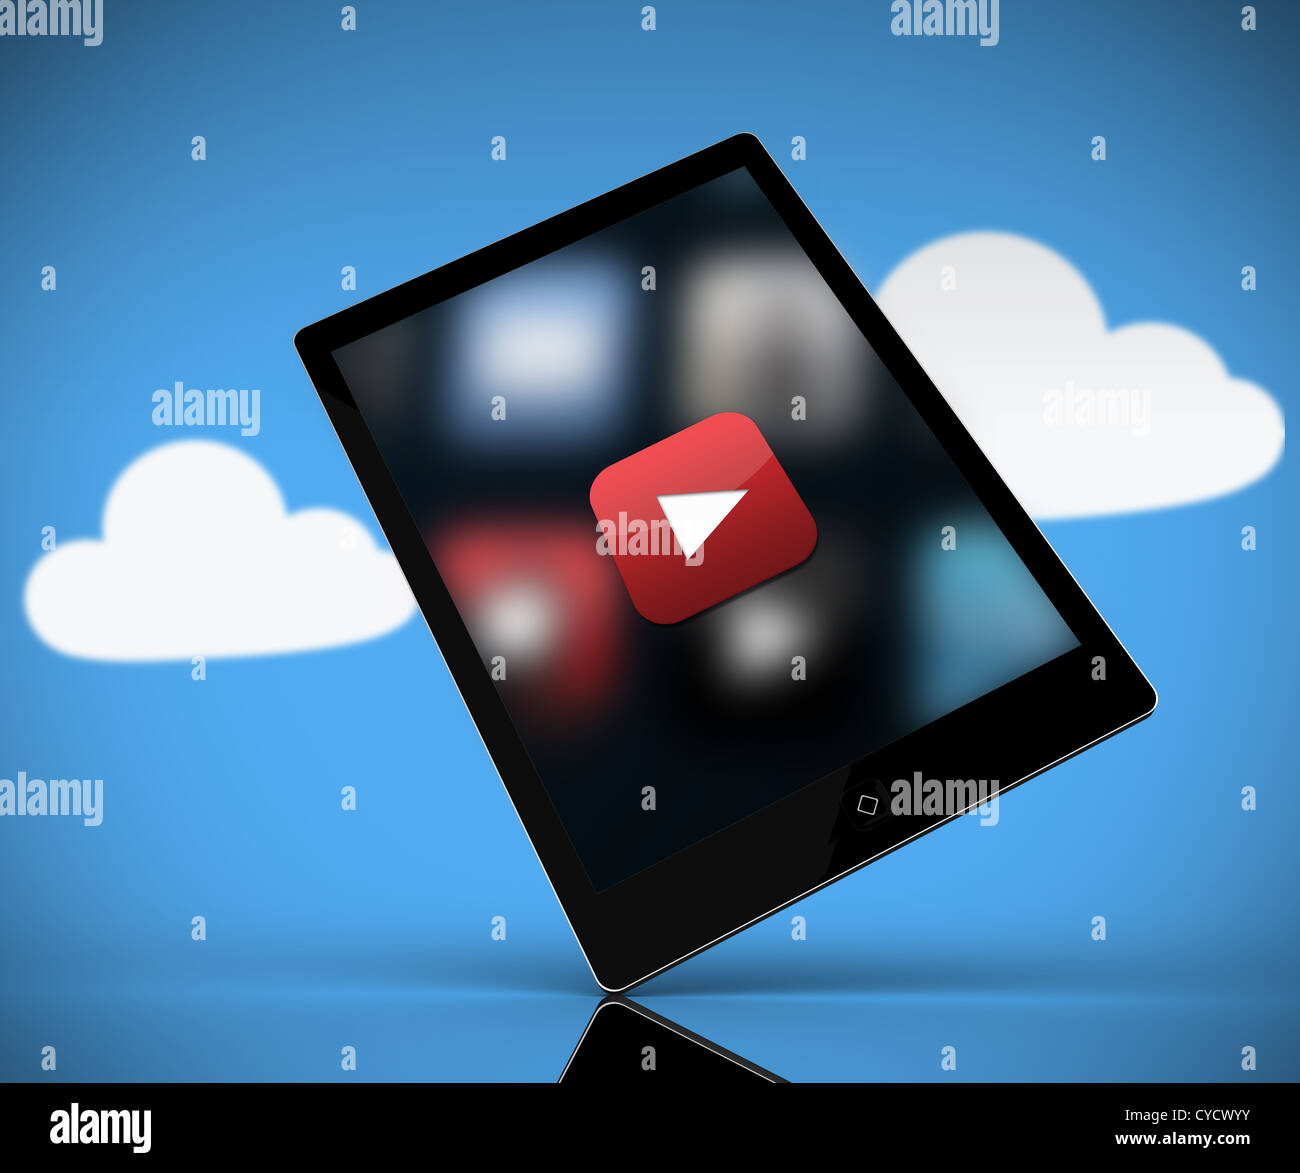 Tablet pc showing play button standing against background with clouds Stock Photo